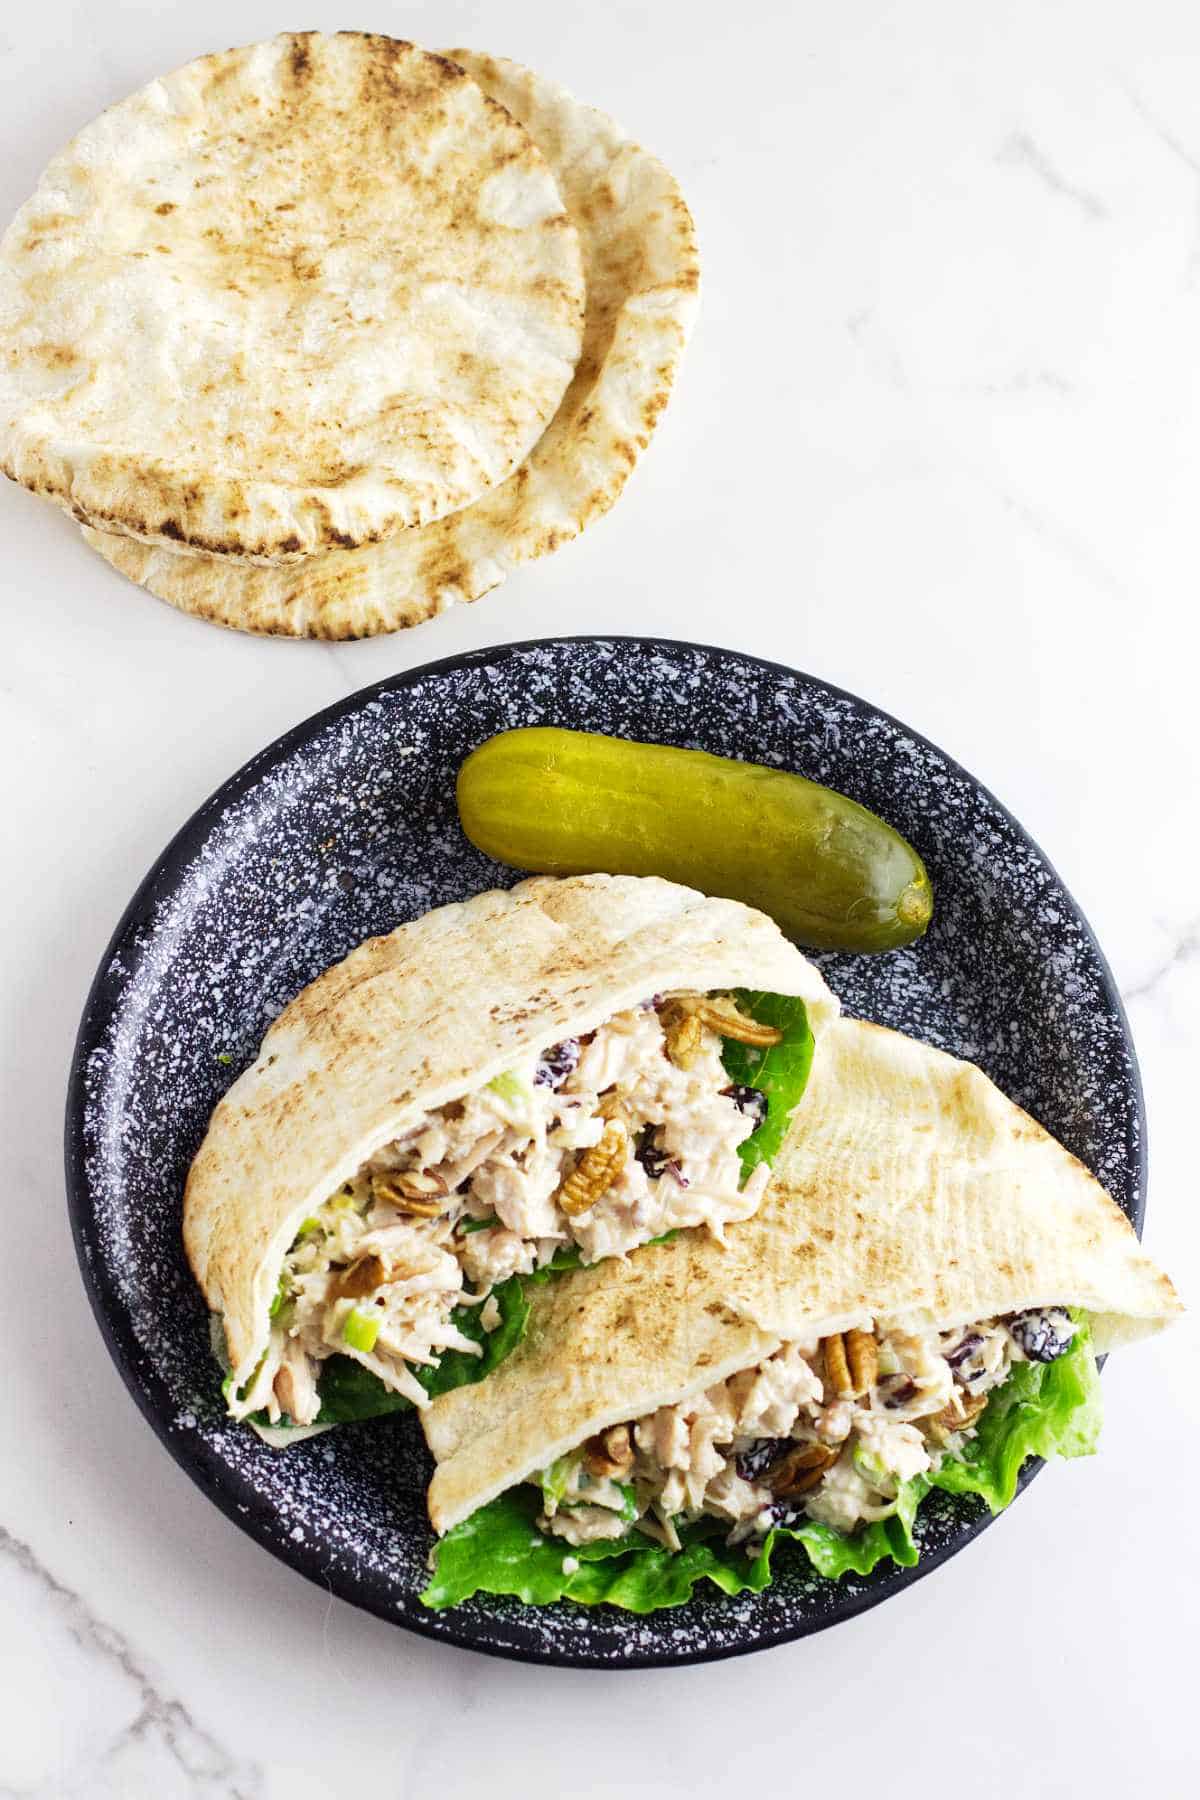 cranberry pecan chicken salad in pita pockets on a plate with a dill pickle.